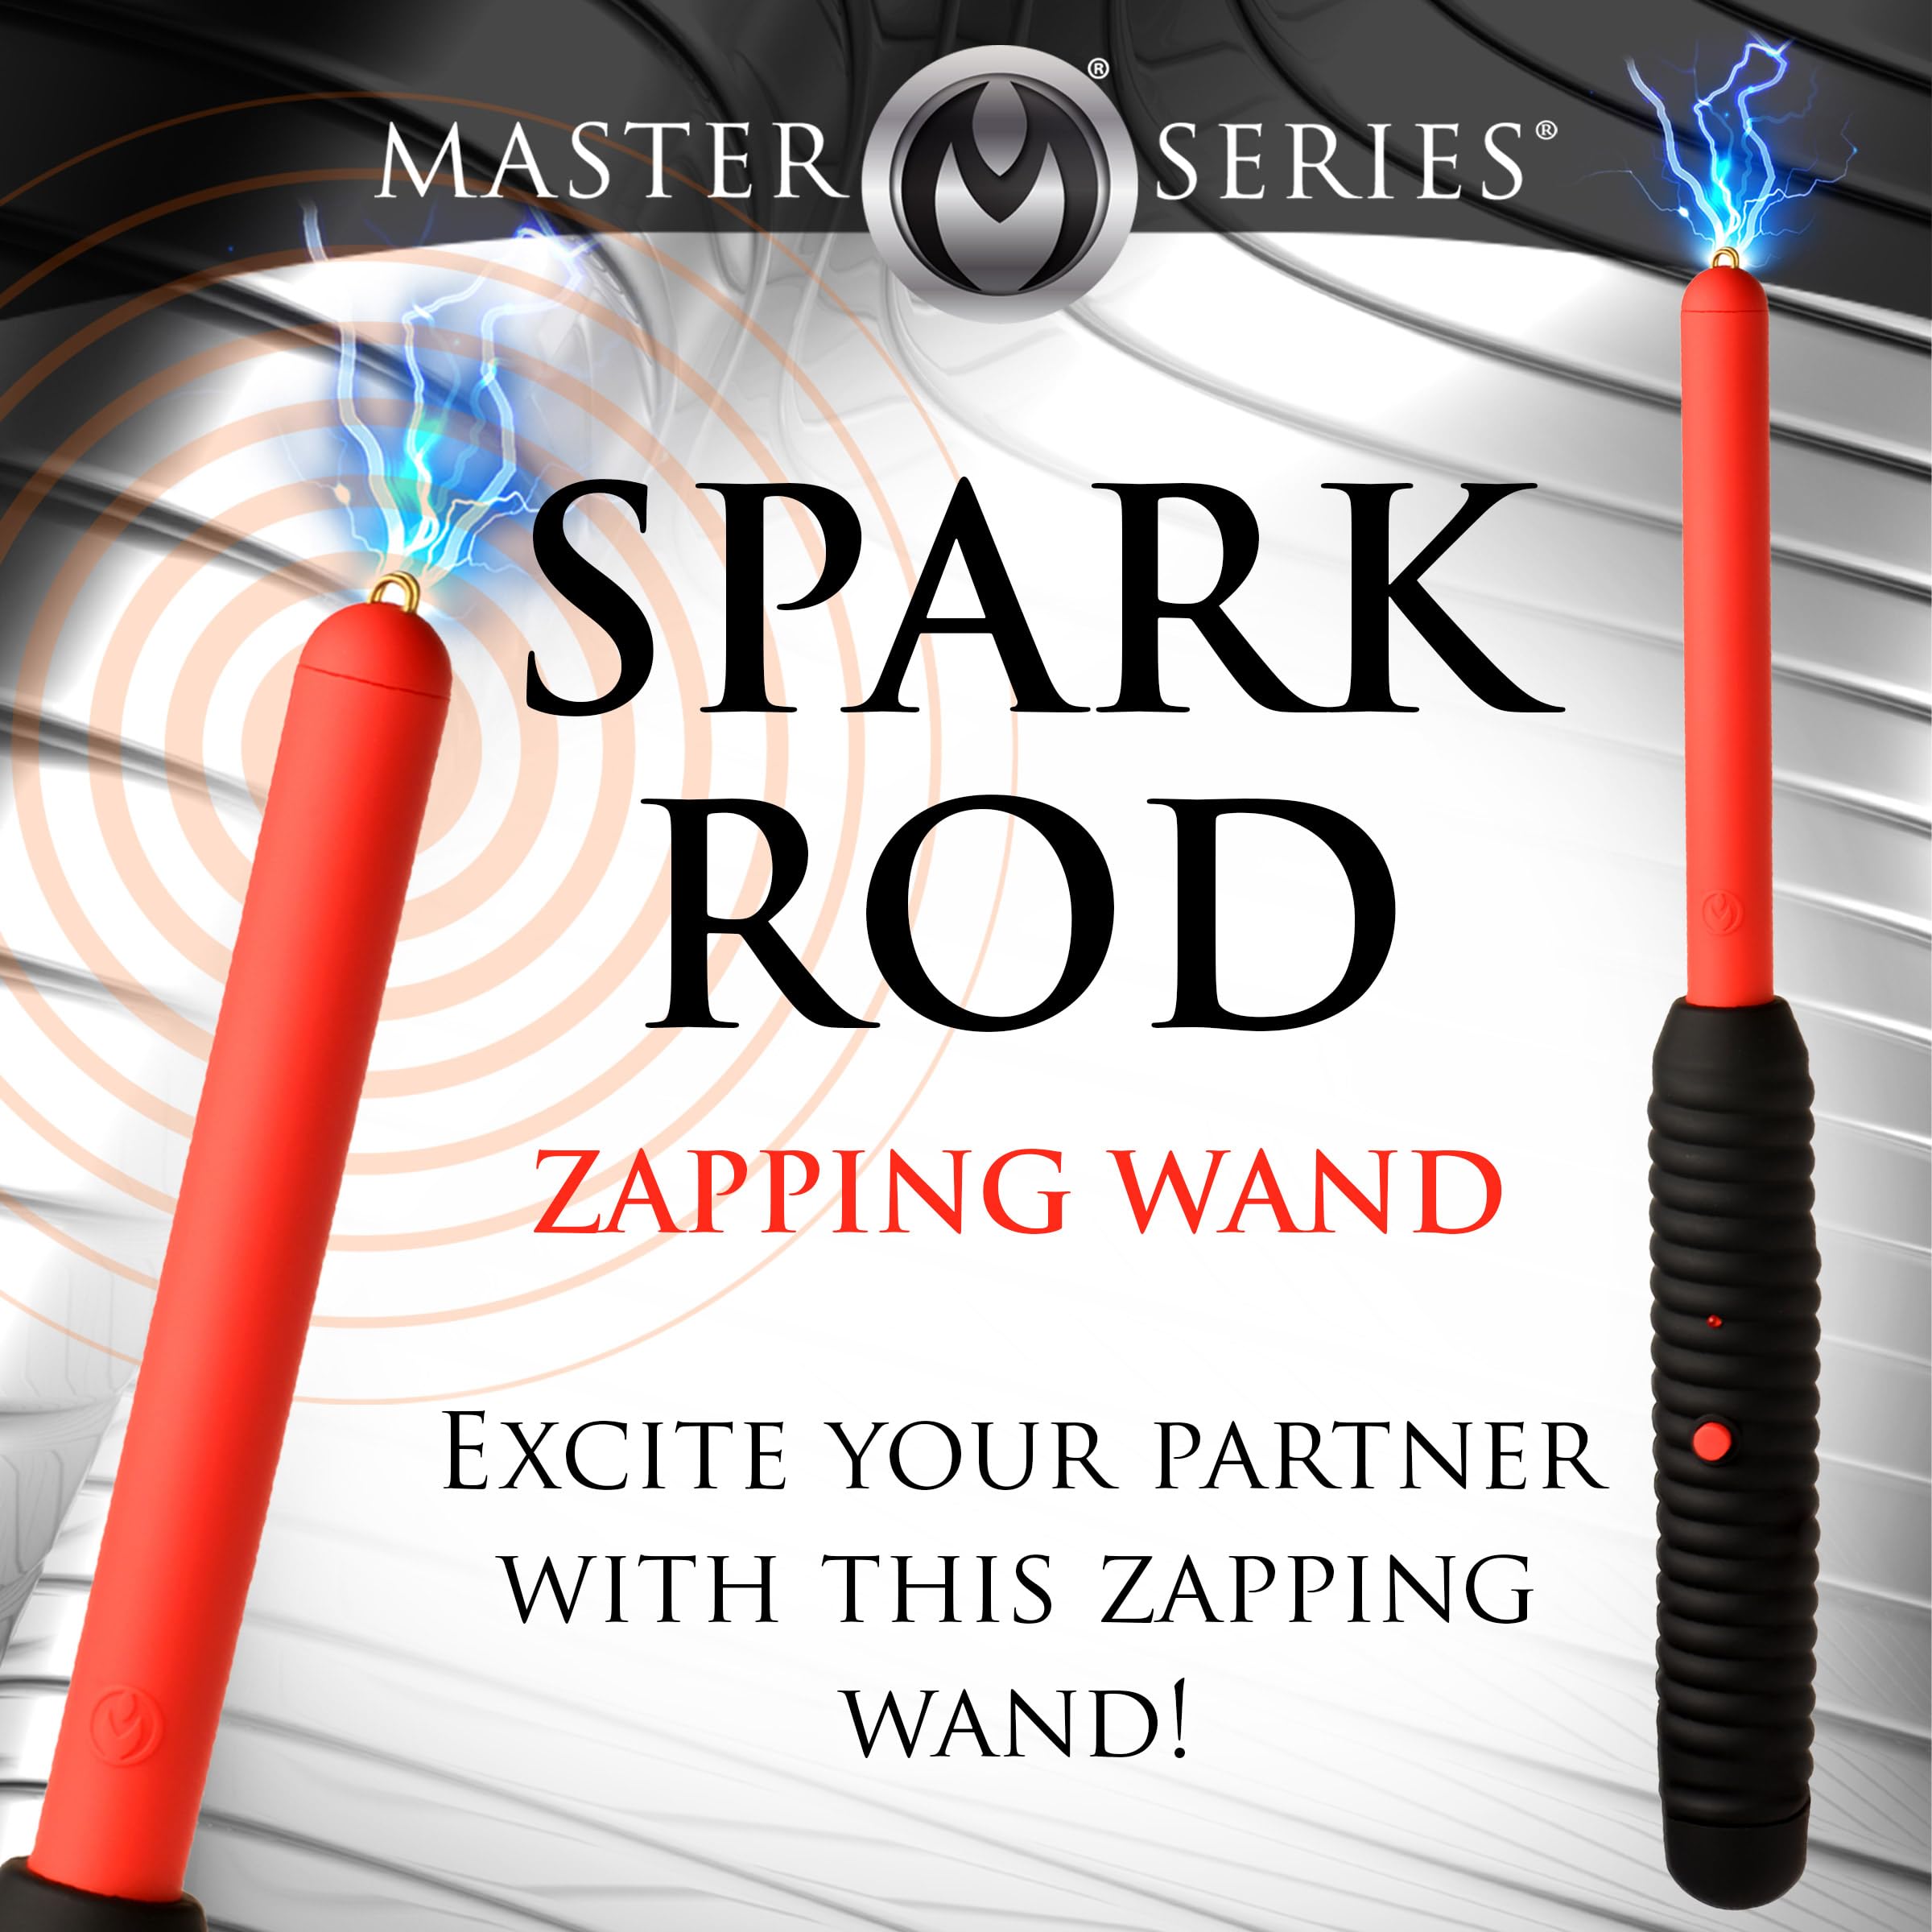 MASTER SERIES Spark Rod Zapping Wand for Men, Women, & Couples. Pinpoint E-Stim, Shock Sensation with Intimidating Sound, Exciting Scene Play, Easy Grip Handle. 1 Piece, Black